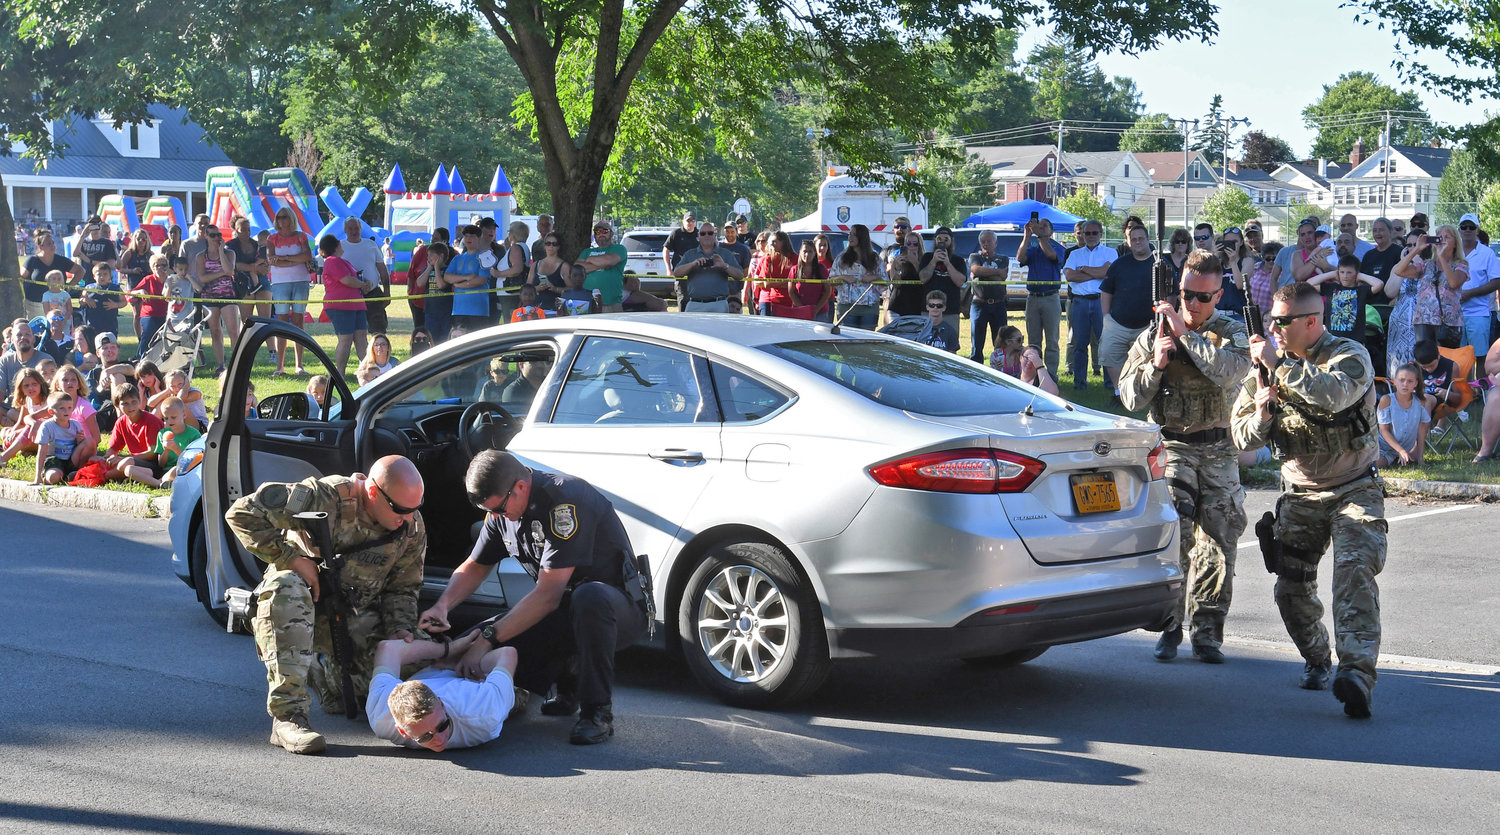 The Rome Police Department's Special Response Team puts on an arrest demonstration for a crowd of people at the department's annual Law Enforcement Day. After a break for the pandemic, the free community day will return to Franklyn's Field on July 23.